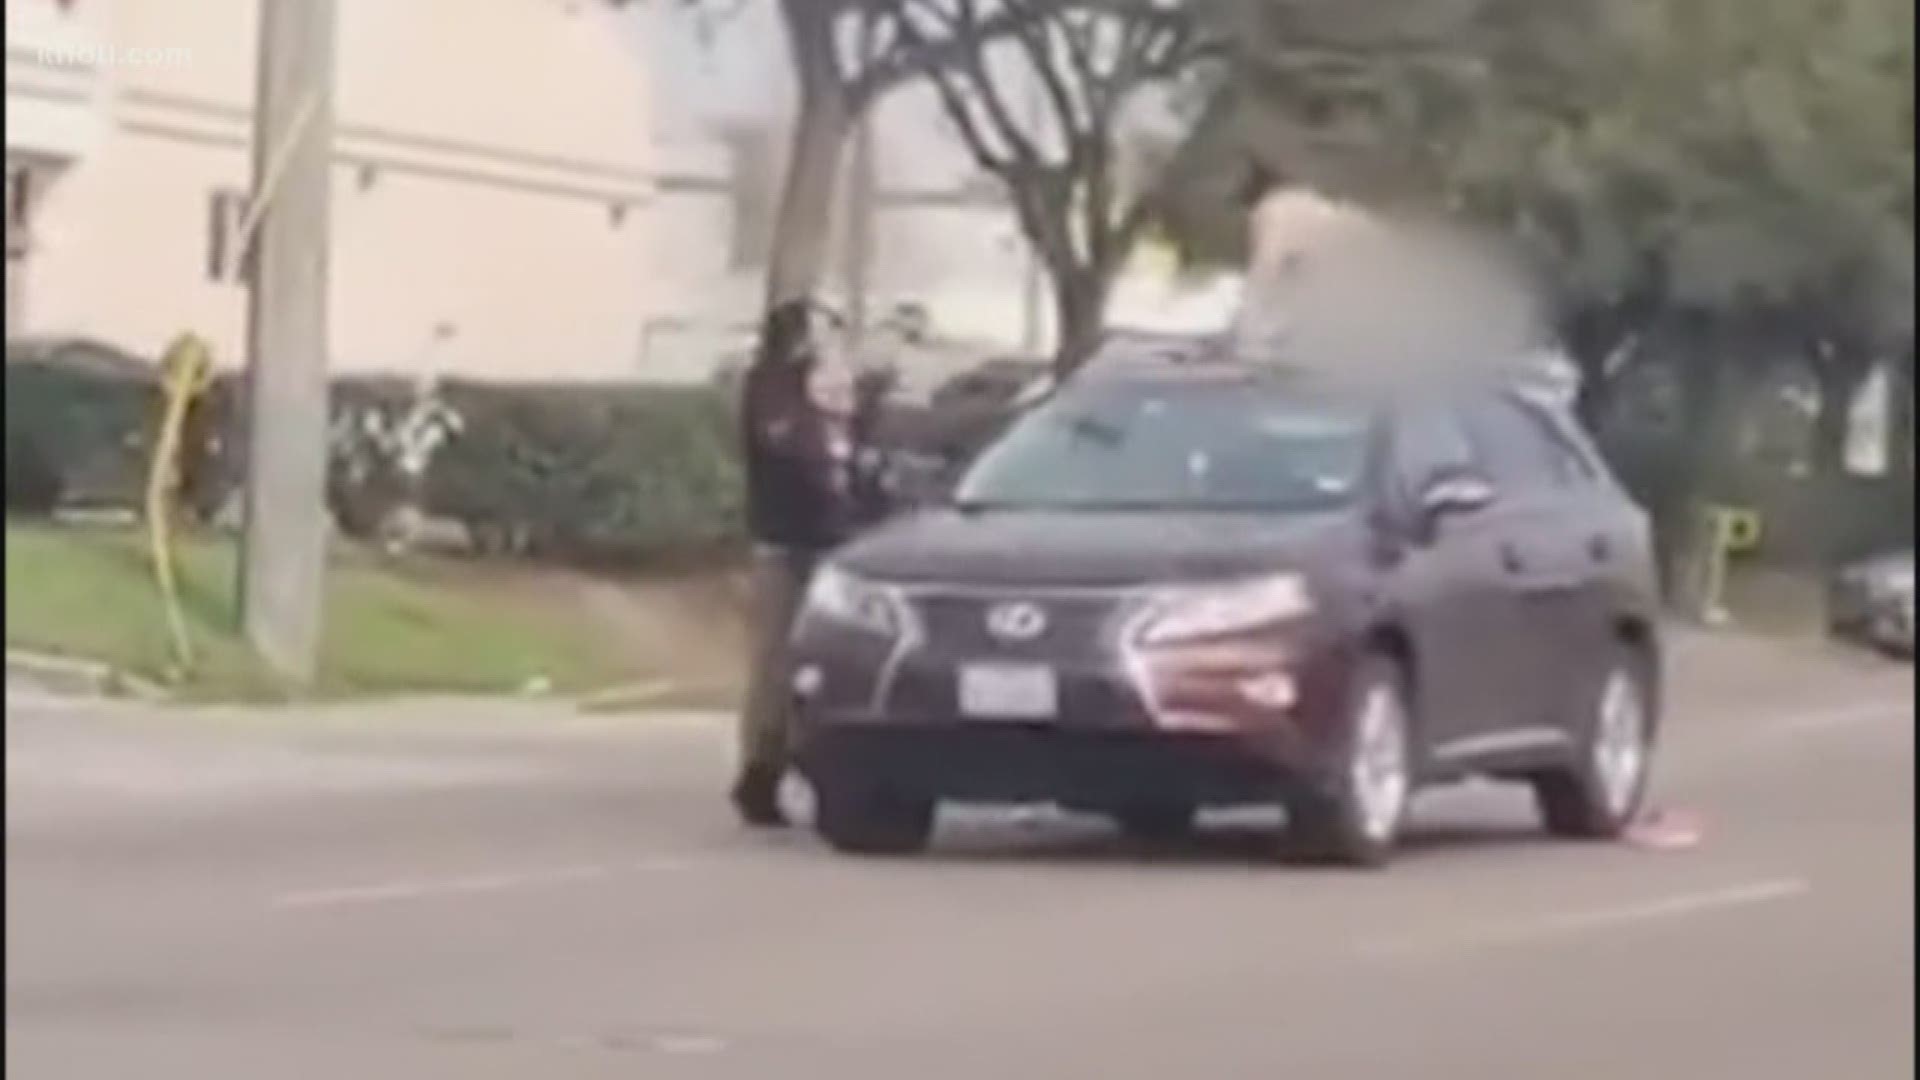 A bizarre moment caught on camera. A man was seen jumping onto a car in traffic and then taking off all his clothes.